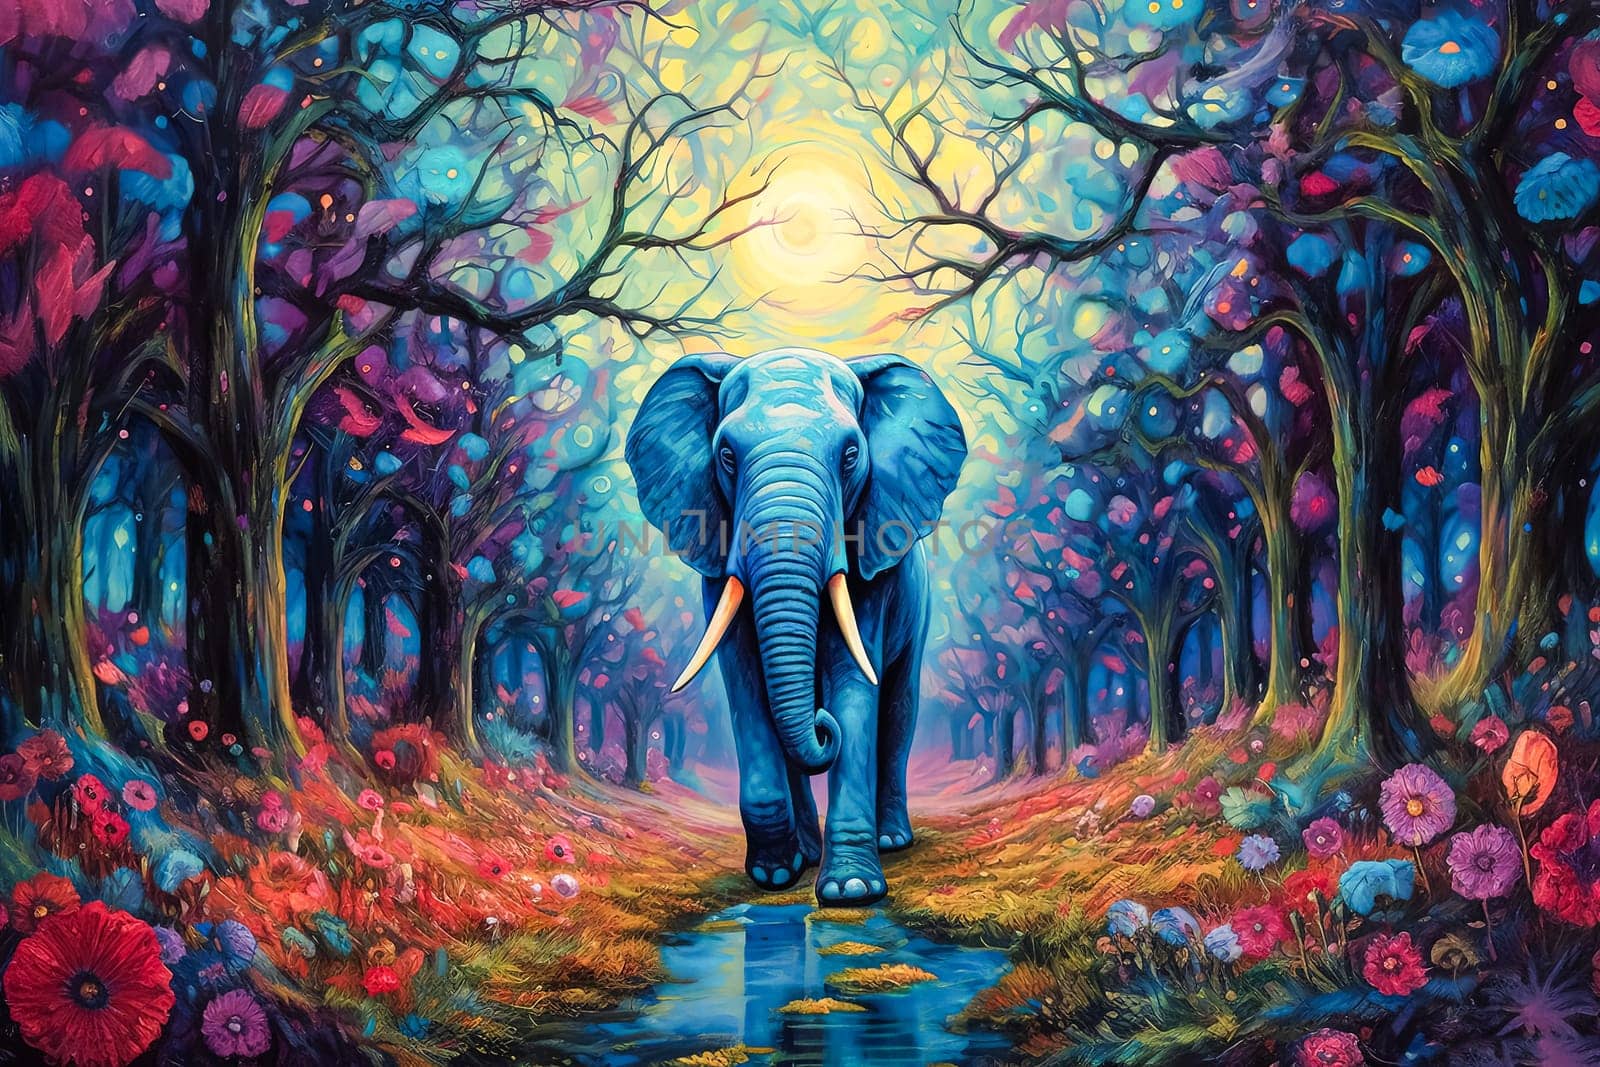 A colorful elephant is standing in a forest. The painting is vibrant and full of life, with the elephant being the main focus. The colors of the elephant